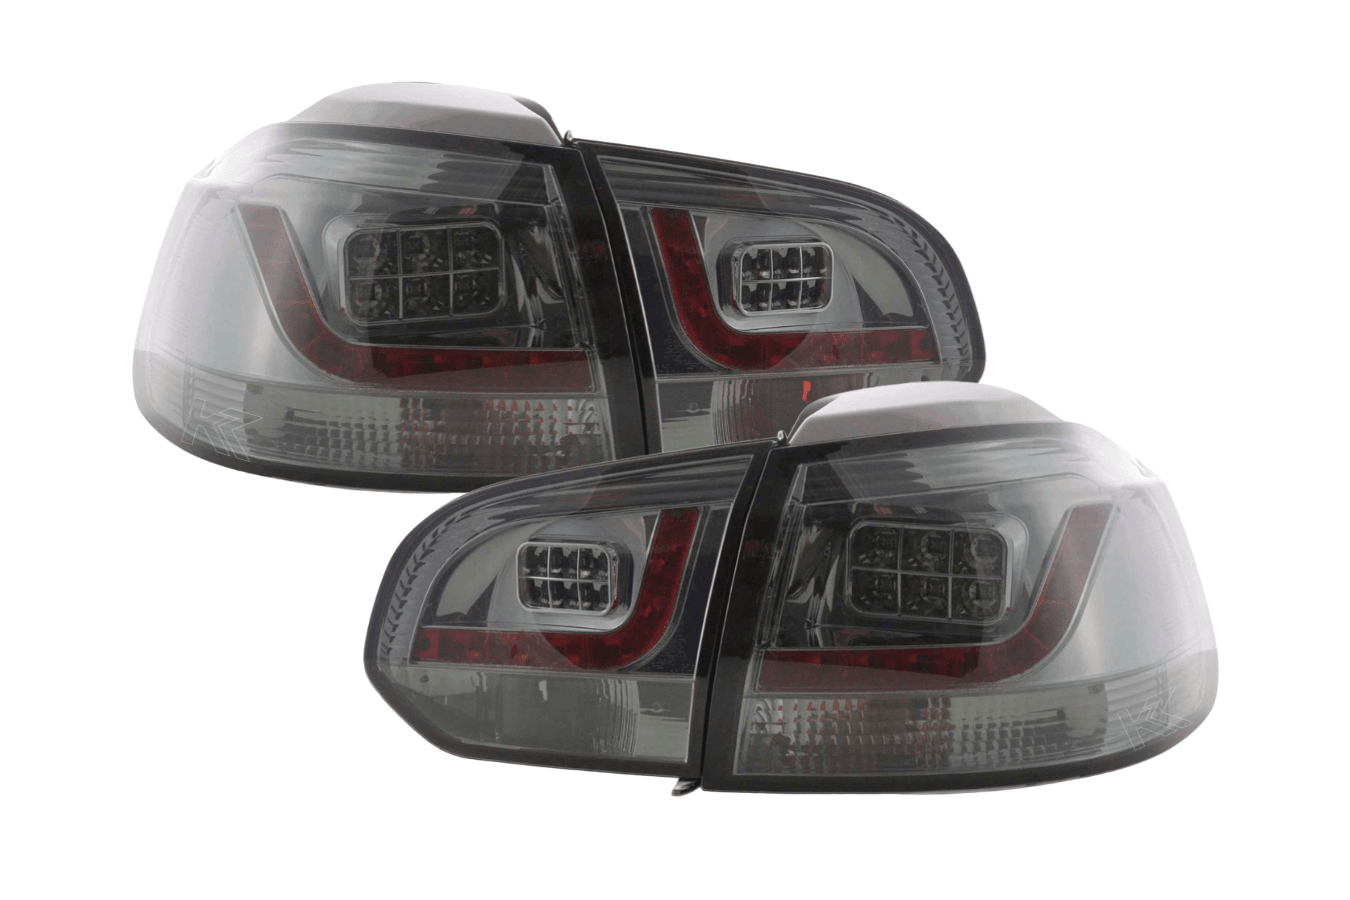 VW Golf Mk6 GTI LED Clear Smoked Tail Lights V2 (2008-2014) - K2 Industries